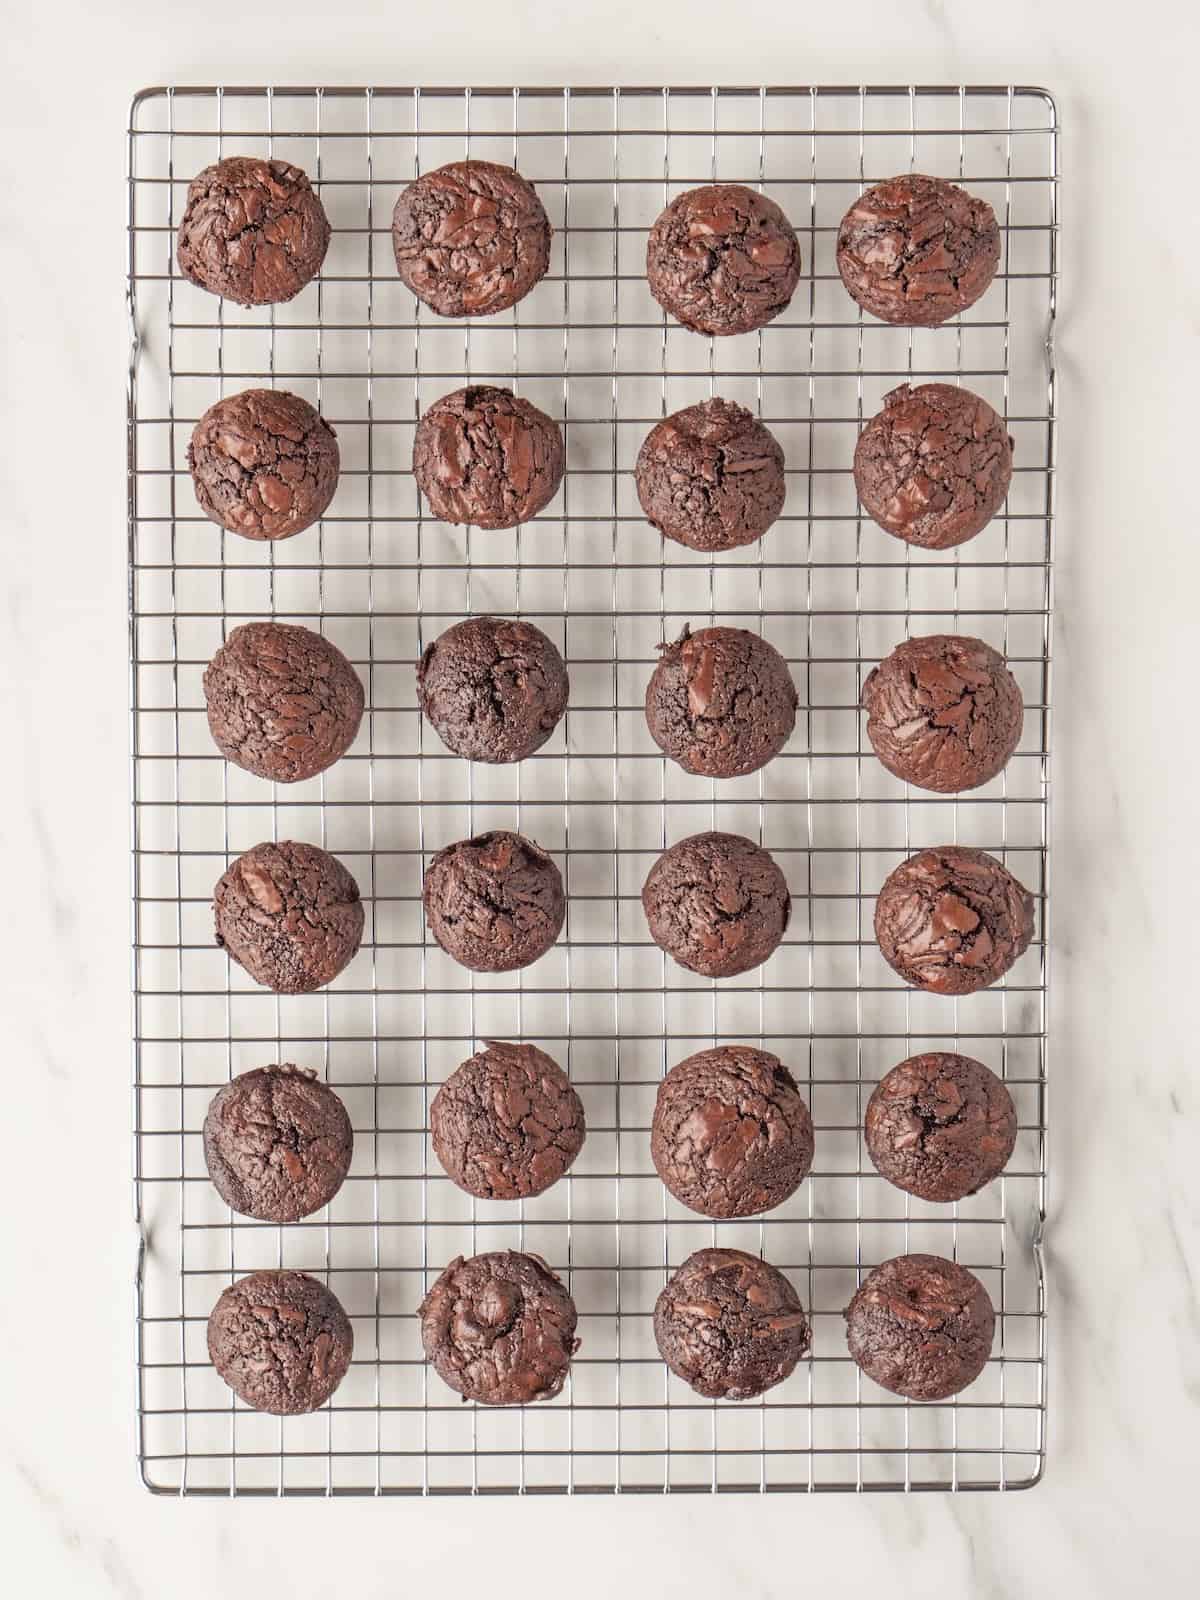 A wire rack with crinkle top brownie bites just baked and removed from pan to be cooled.